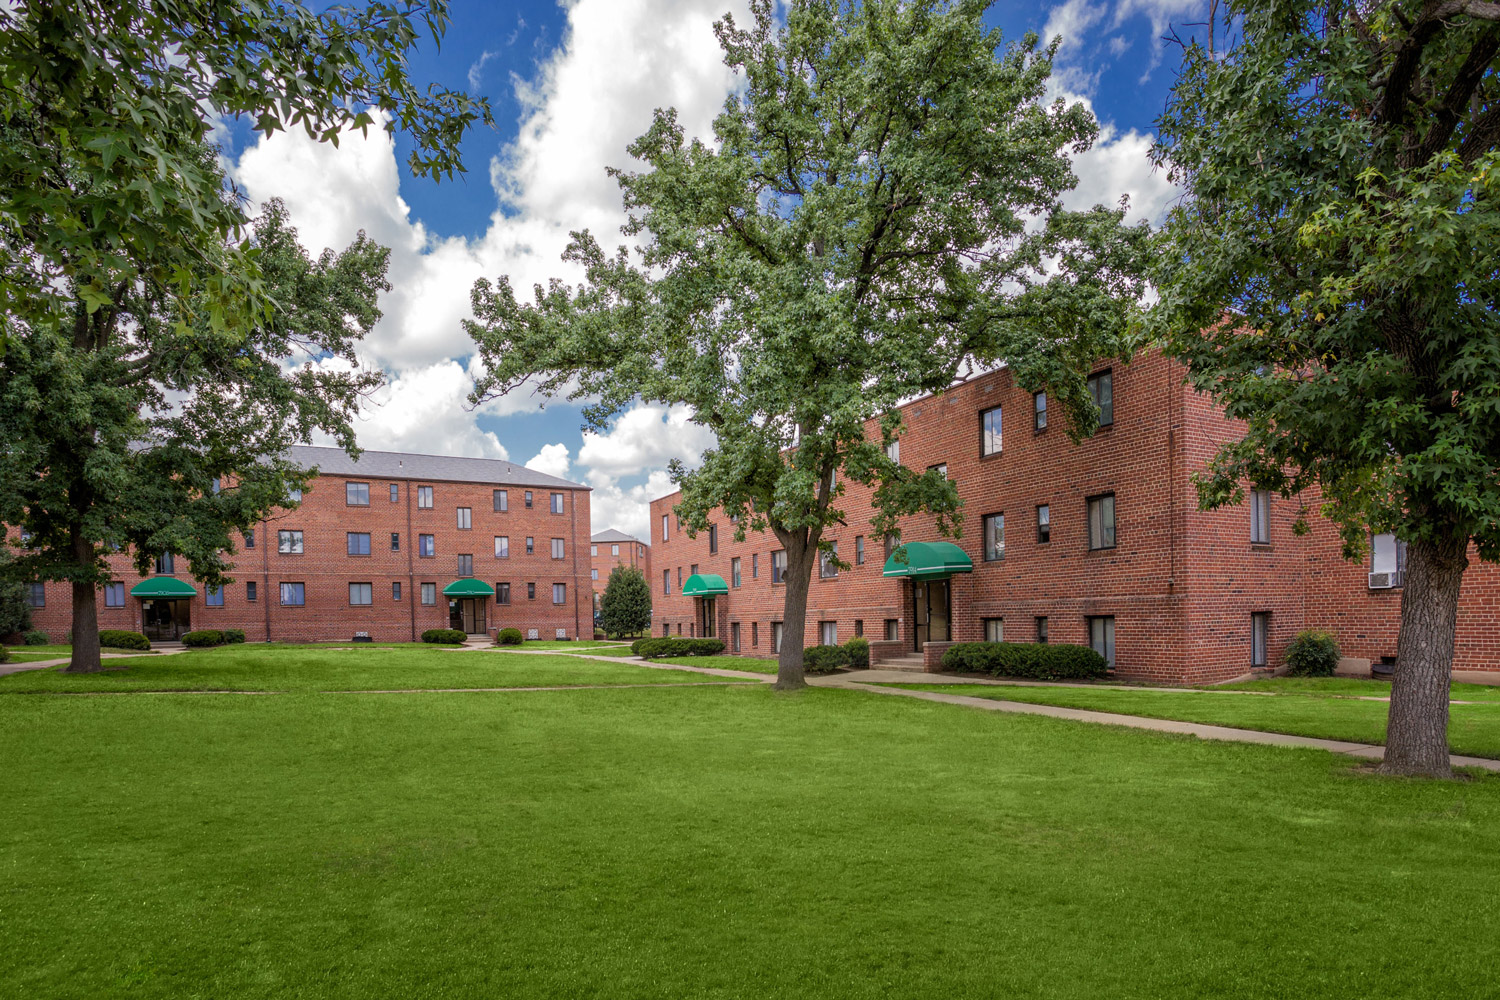 Beautiful views of green courtyards at Liberty Place Apartments in Langley Park, MD